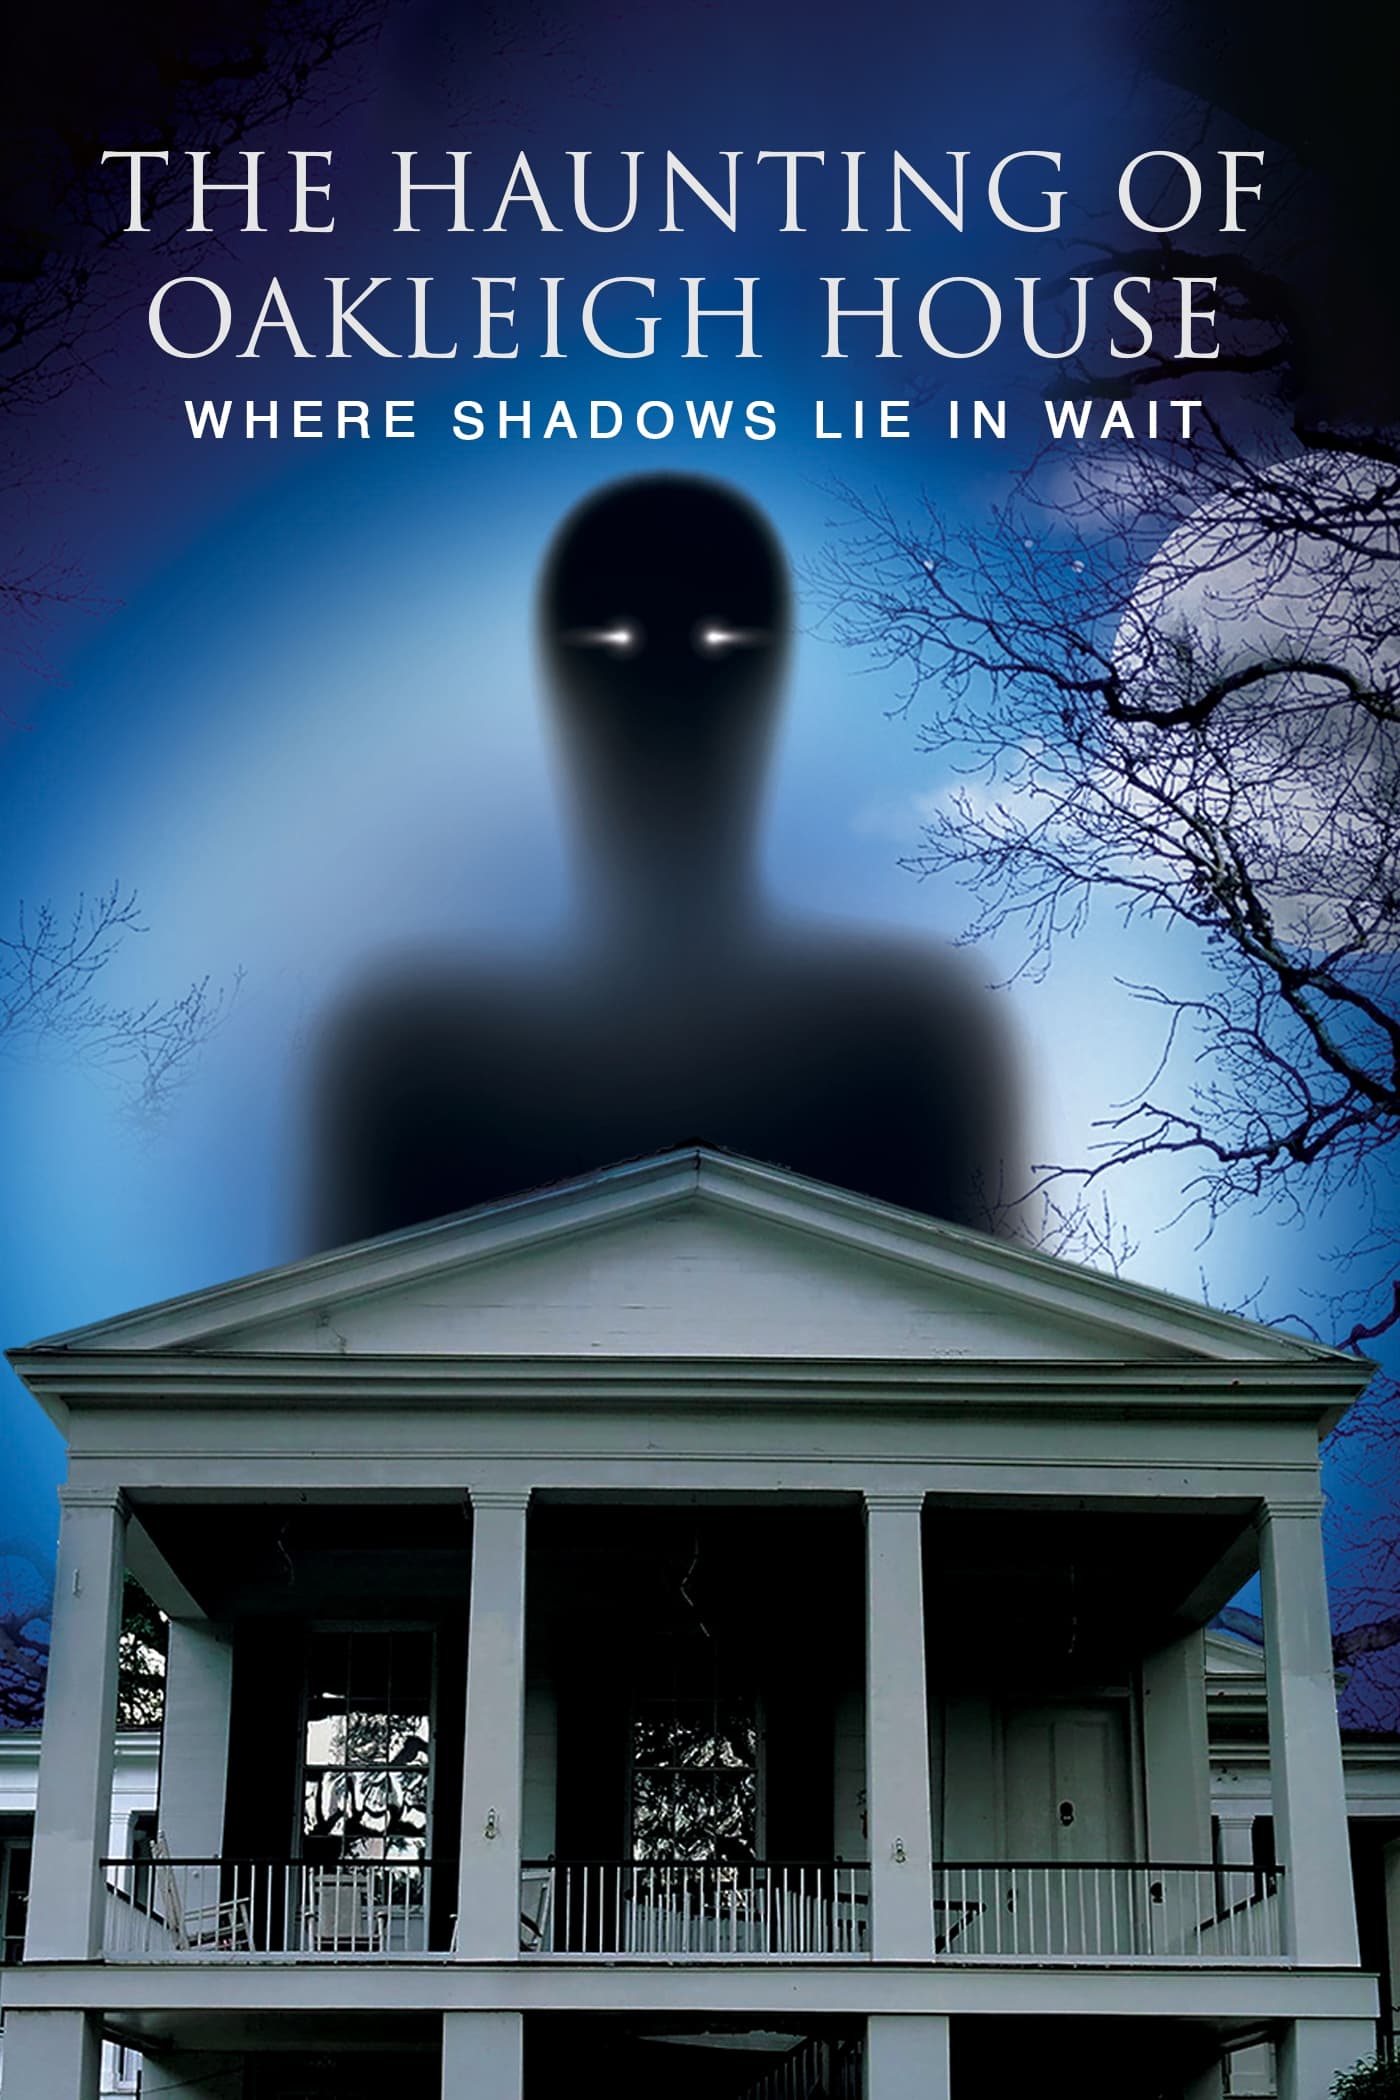 The Haunting of Oakleigh House: Where Shadows Lie in Wait